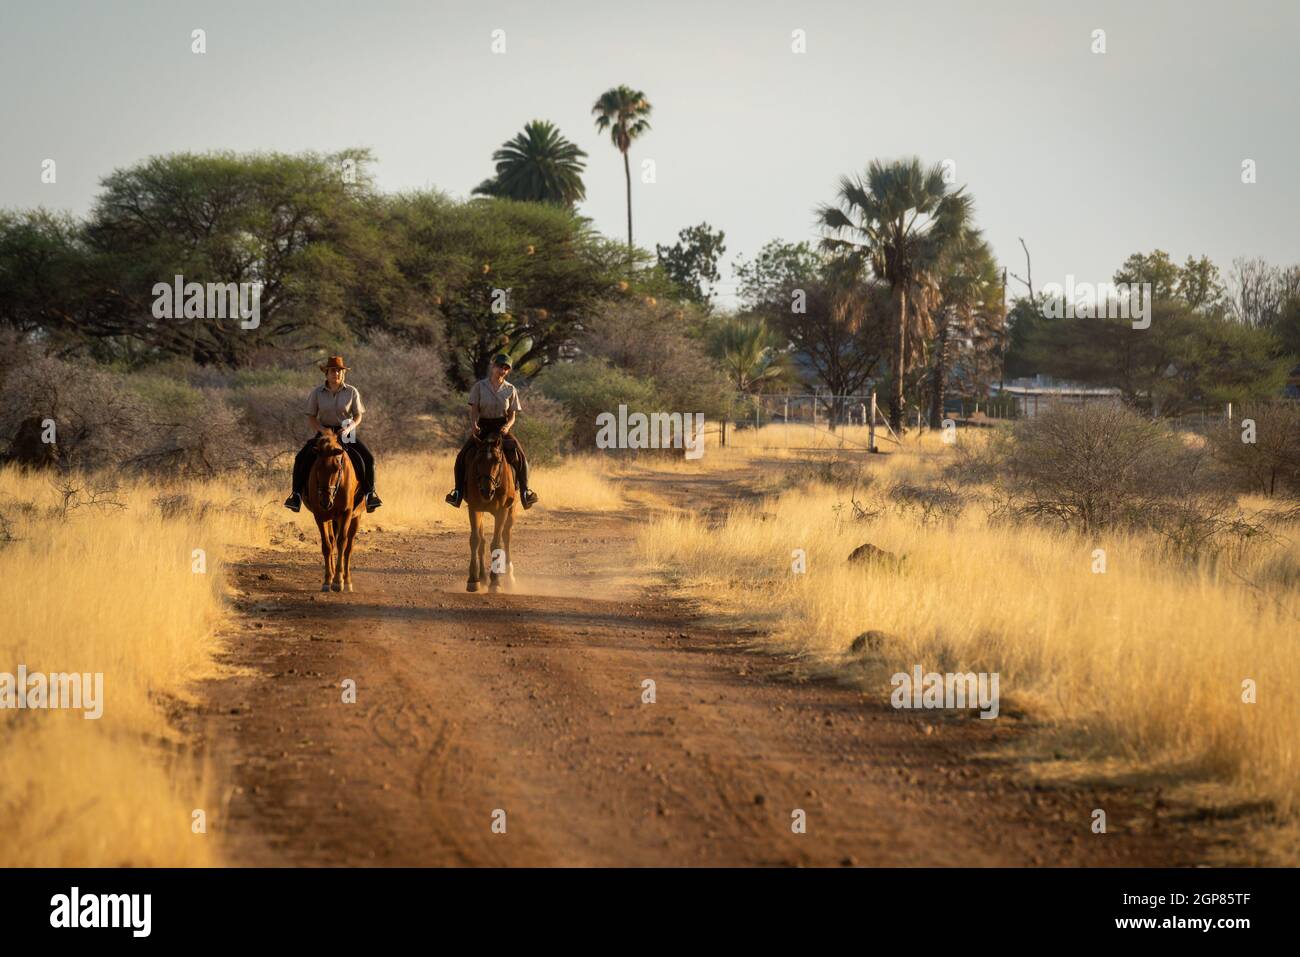 Two horsewomen ride along dirt track side-by-side Stock Photo